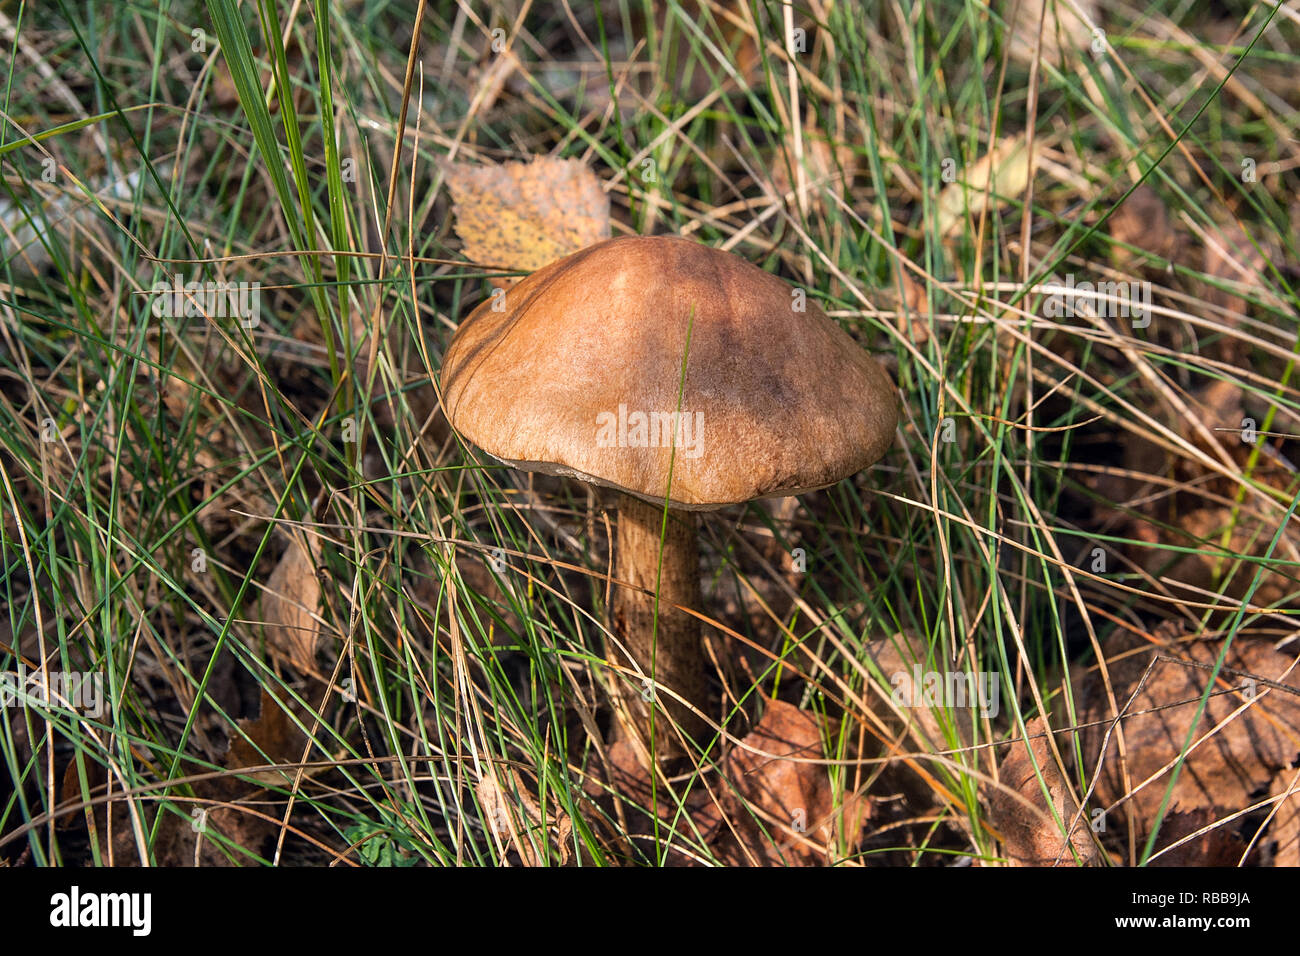 Close up view of edible forest mushroom brown cap boletus growing in the autumn forest among fallen leaves and grass. Stock Photo